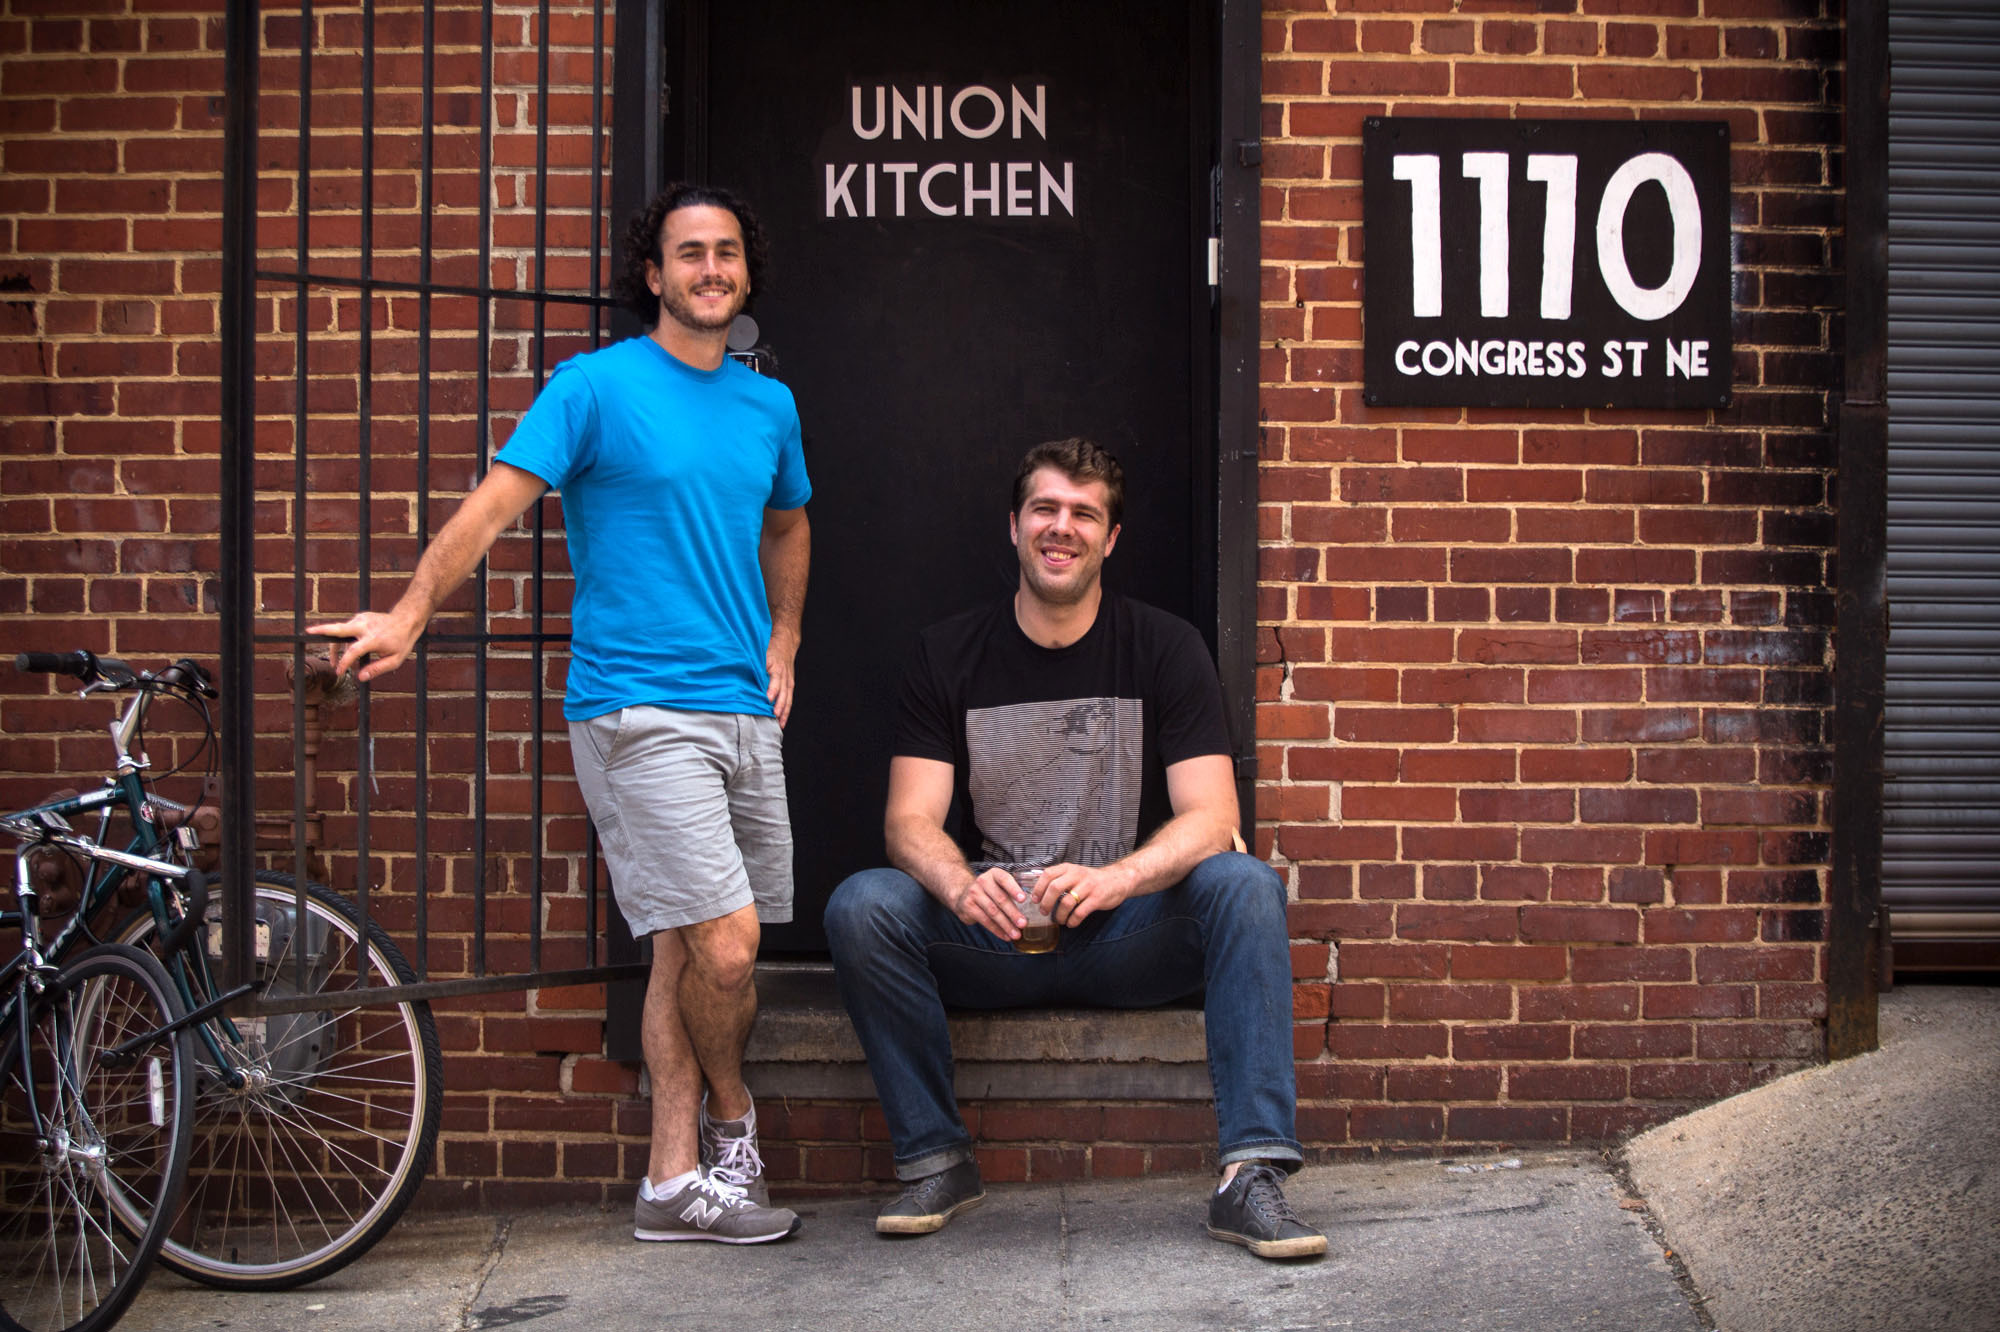 Jonas Singer (left) and Cullen Gilchrist co-founded Union Kitchen, a food incubator in Washington, D.C. Photo: Meredith Rizzo/NPR 